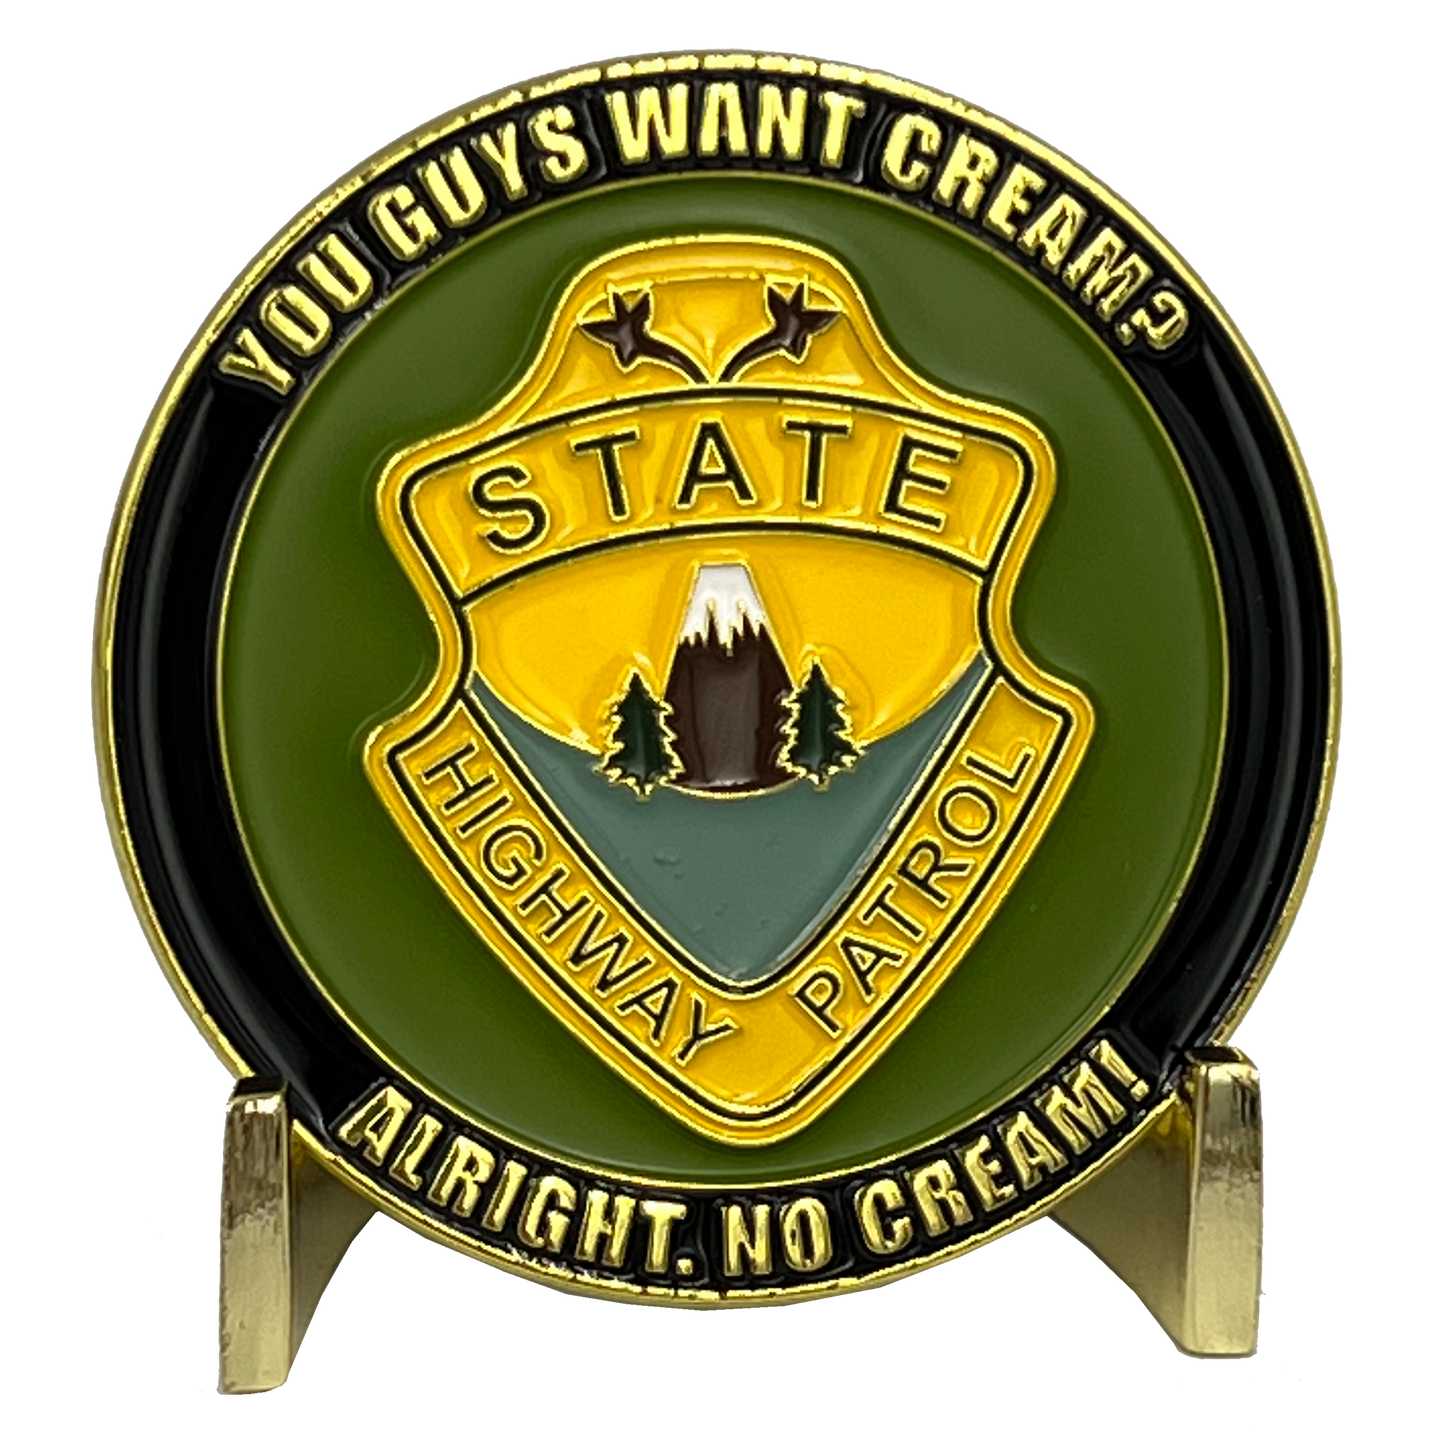 EL12-004 Super Troopers Mustache Rides Challenge Coin Police State Trooper you guys want cream